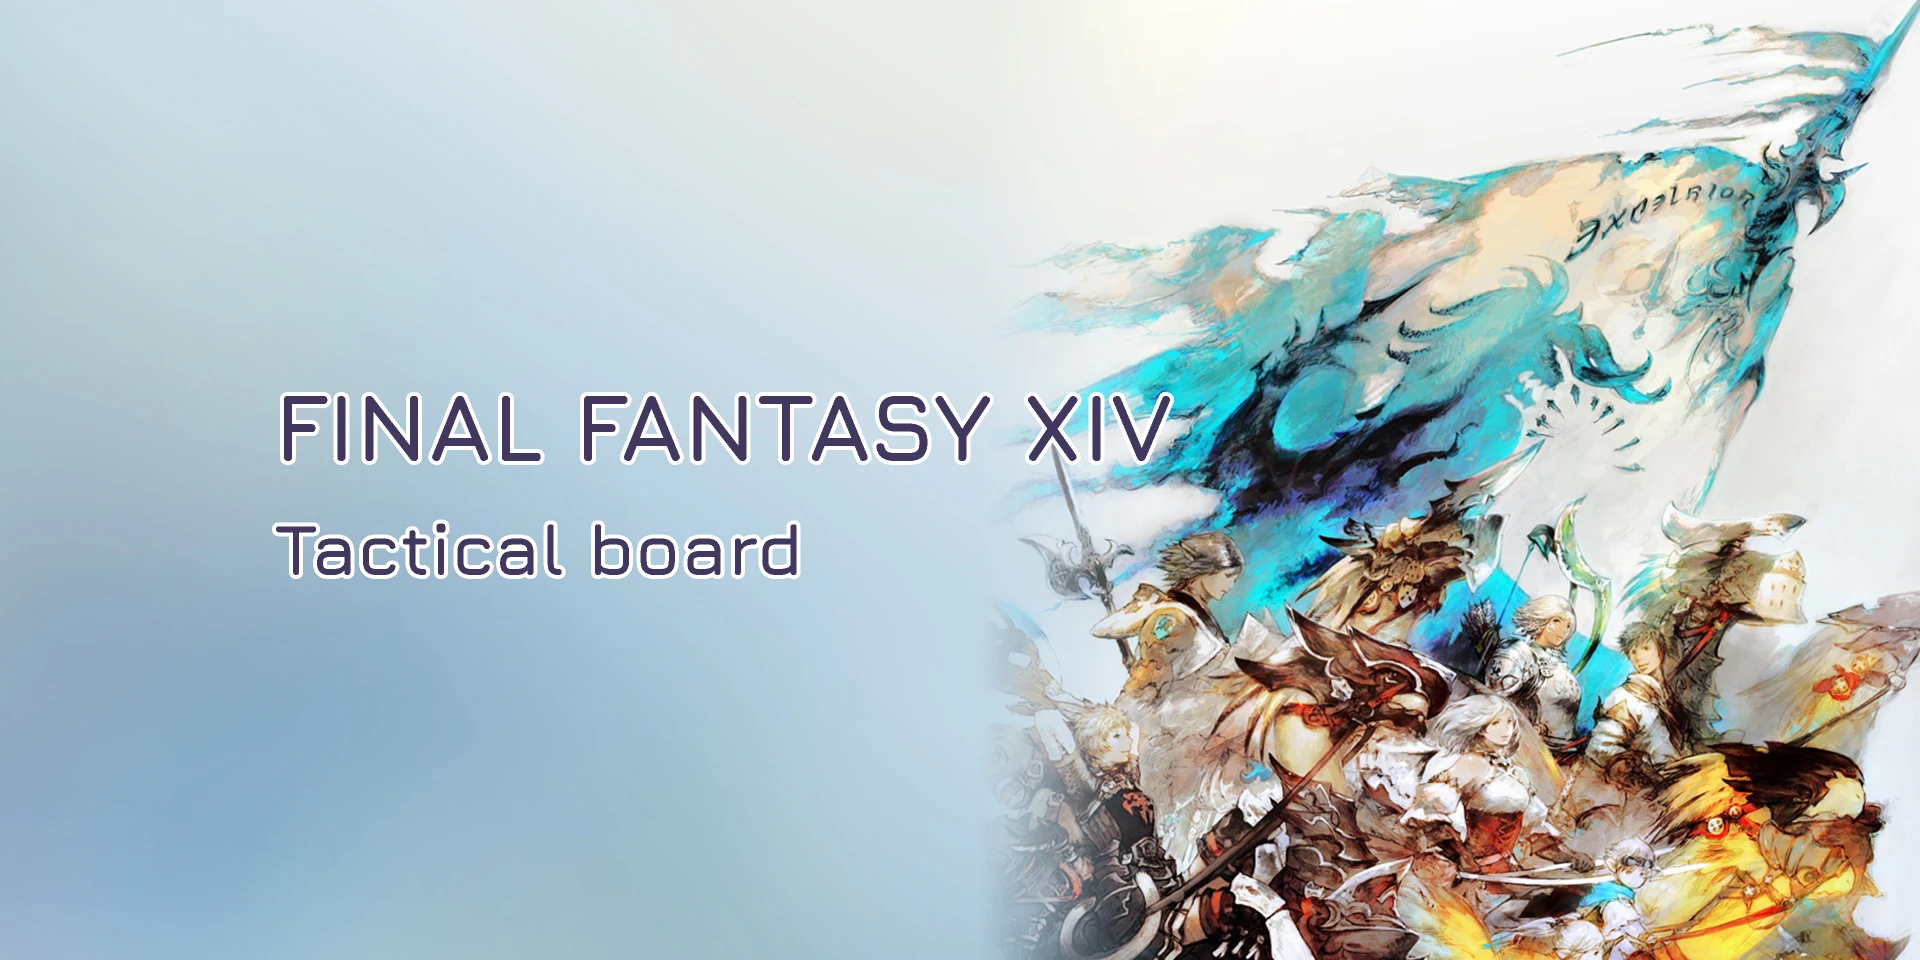 FFXIV Tactical board for Figma and Adobe XD